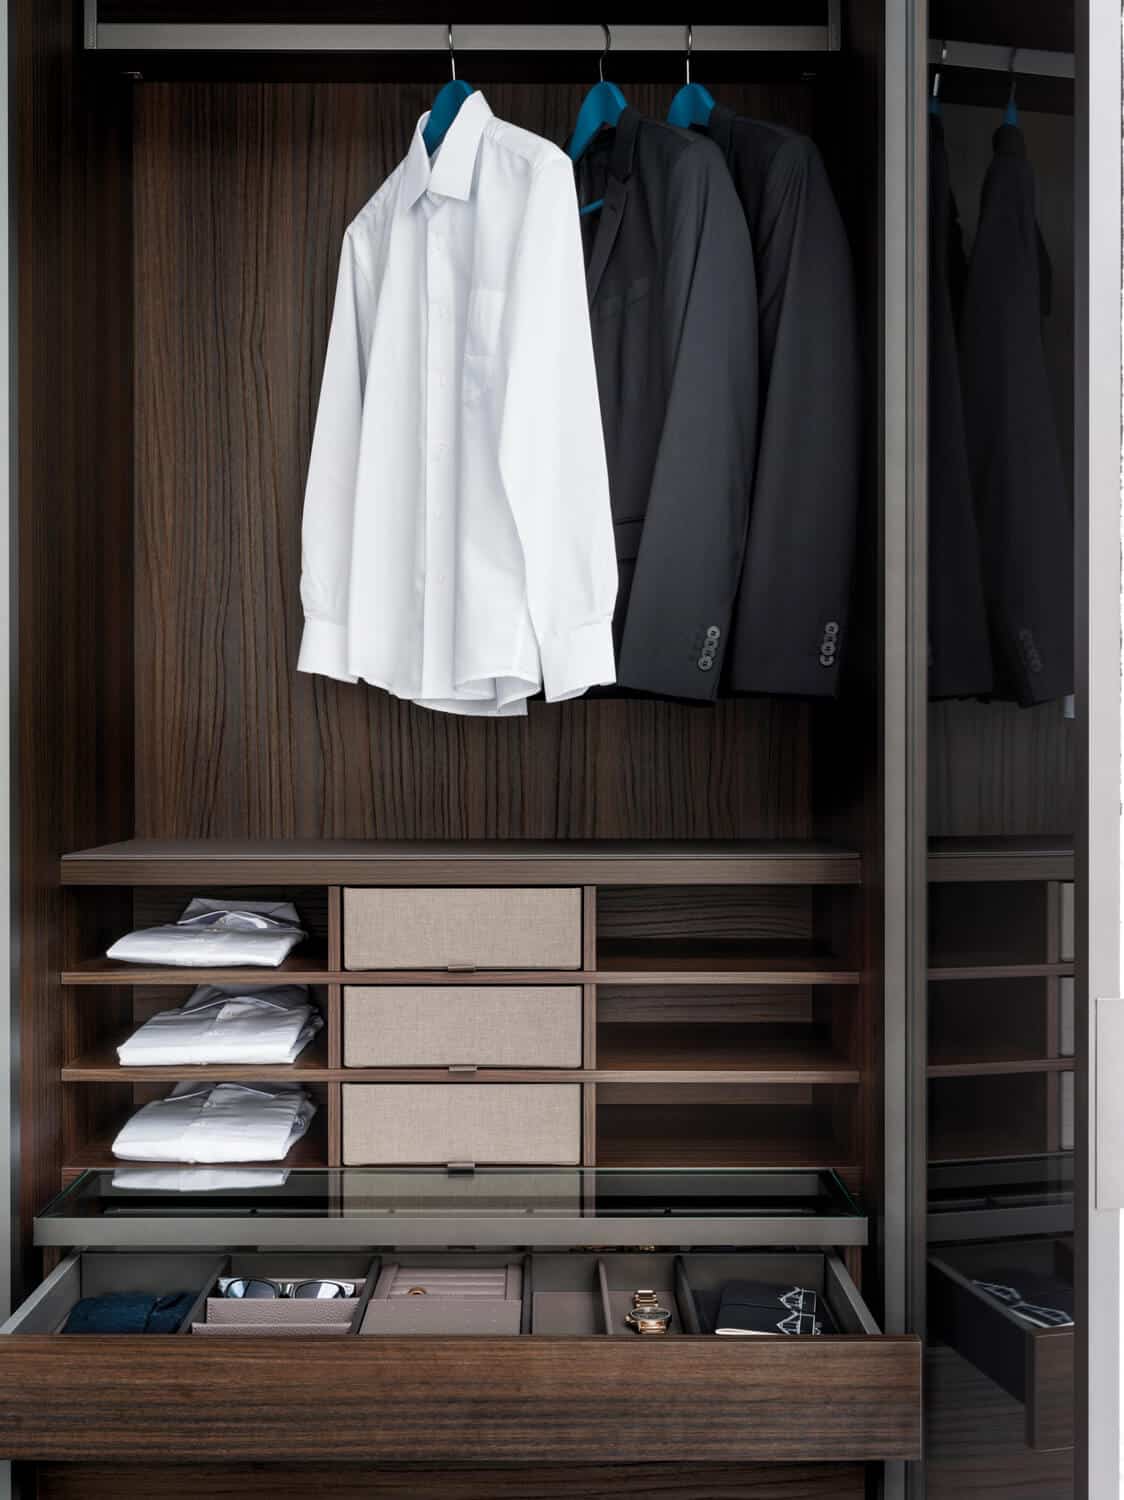 Choosing what to wear has never been more fun. Keeping clothes and accessories organized has never been easier. The Core modular system helps you customize your closet inch by inch.